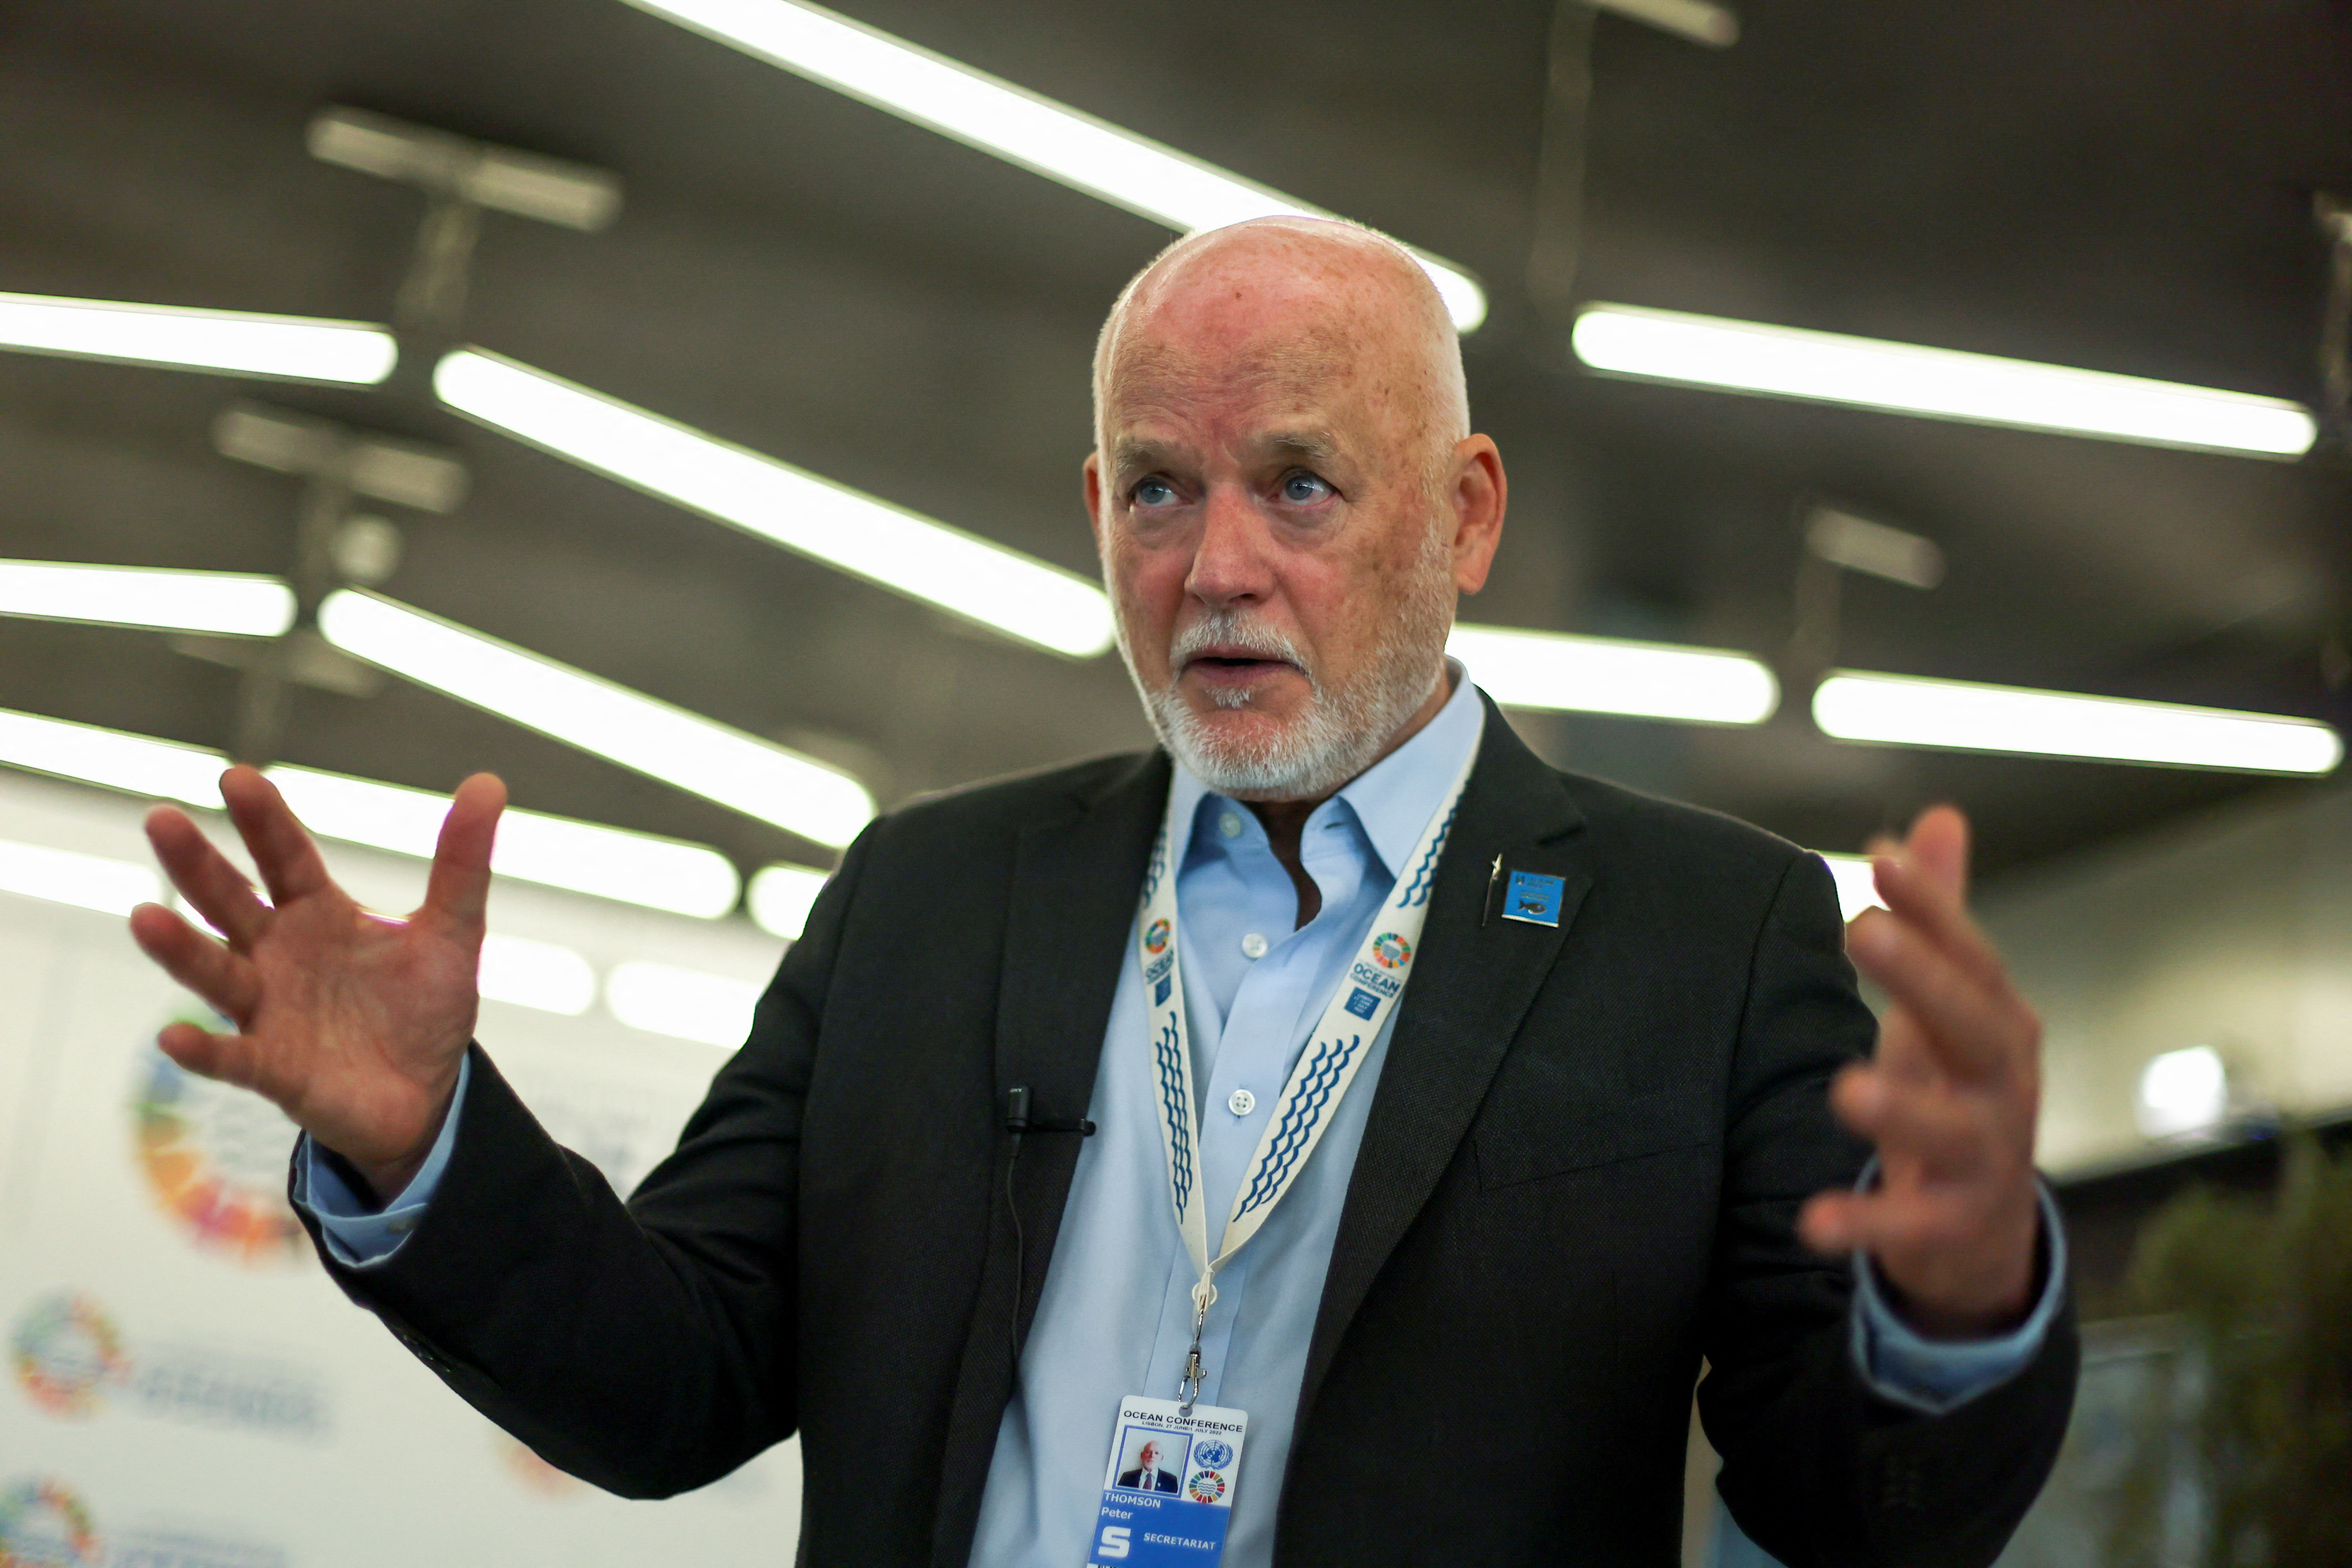 UN Special Envoy for the Ocean, Peter Thomson, gestures during an interview ahead of the 2022 Ocean Conference in Lisbon